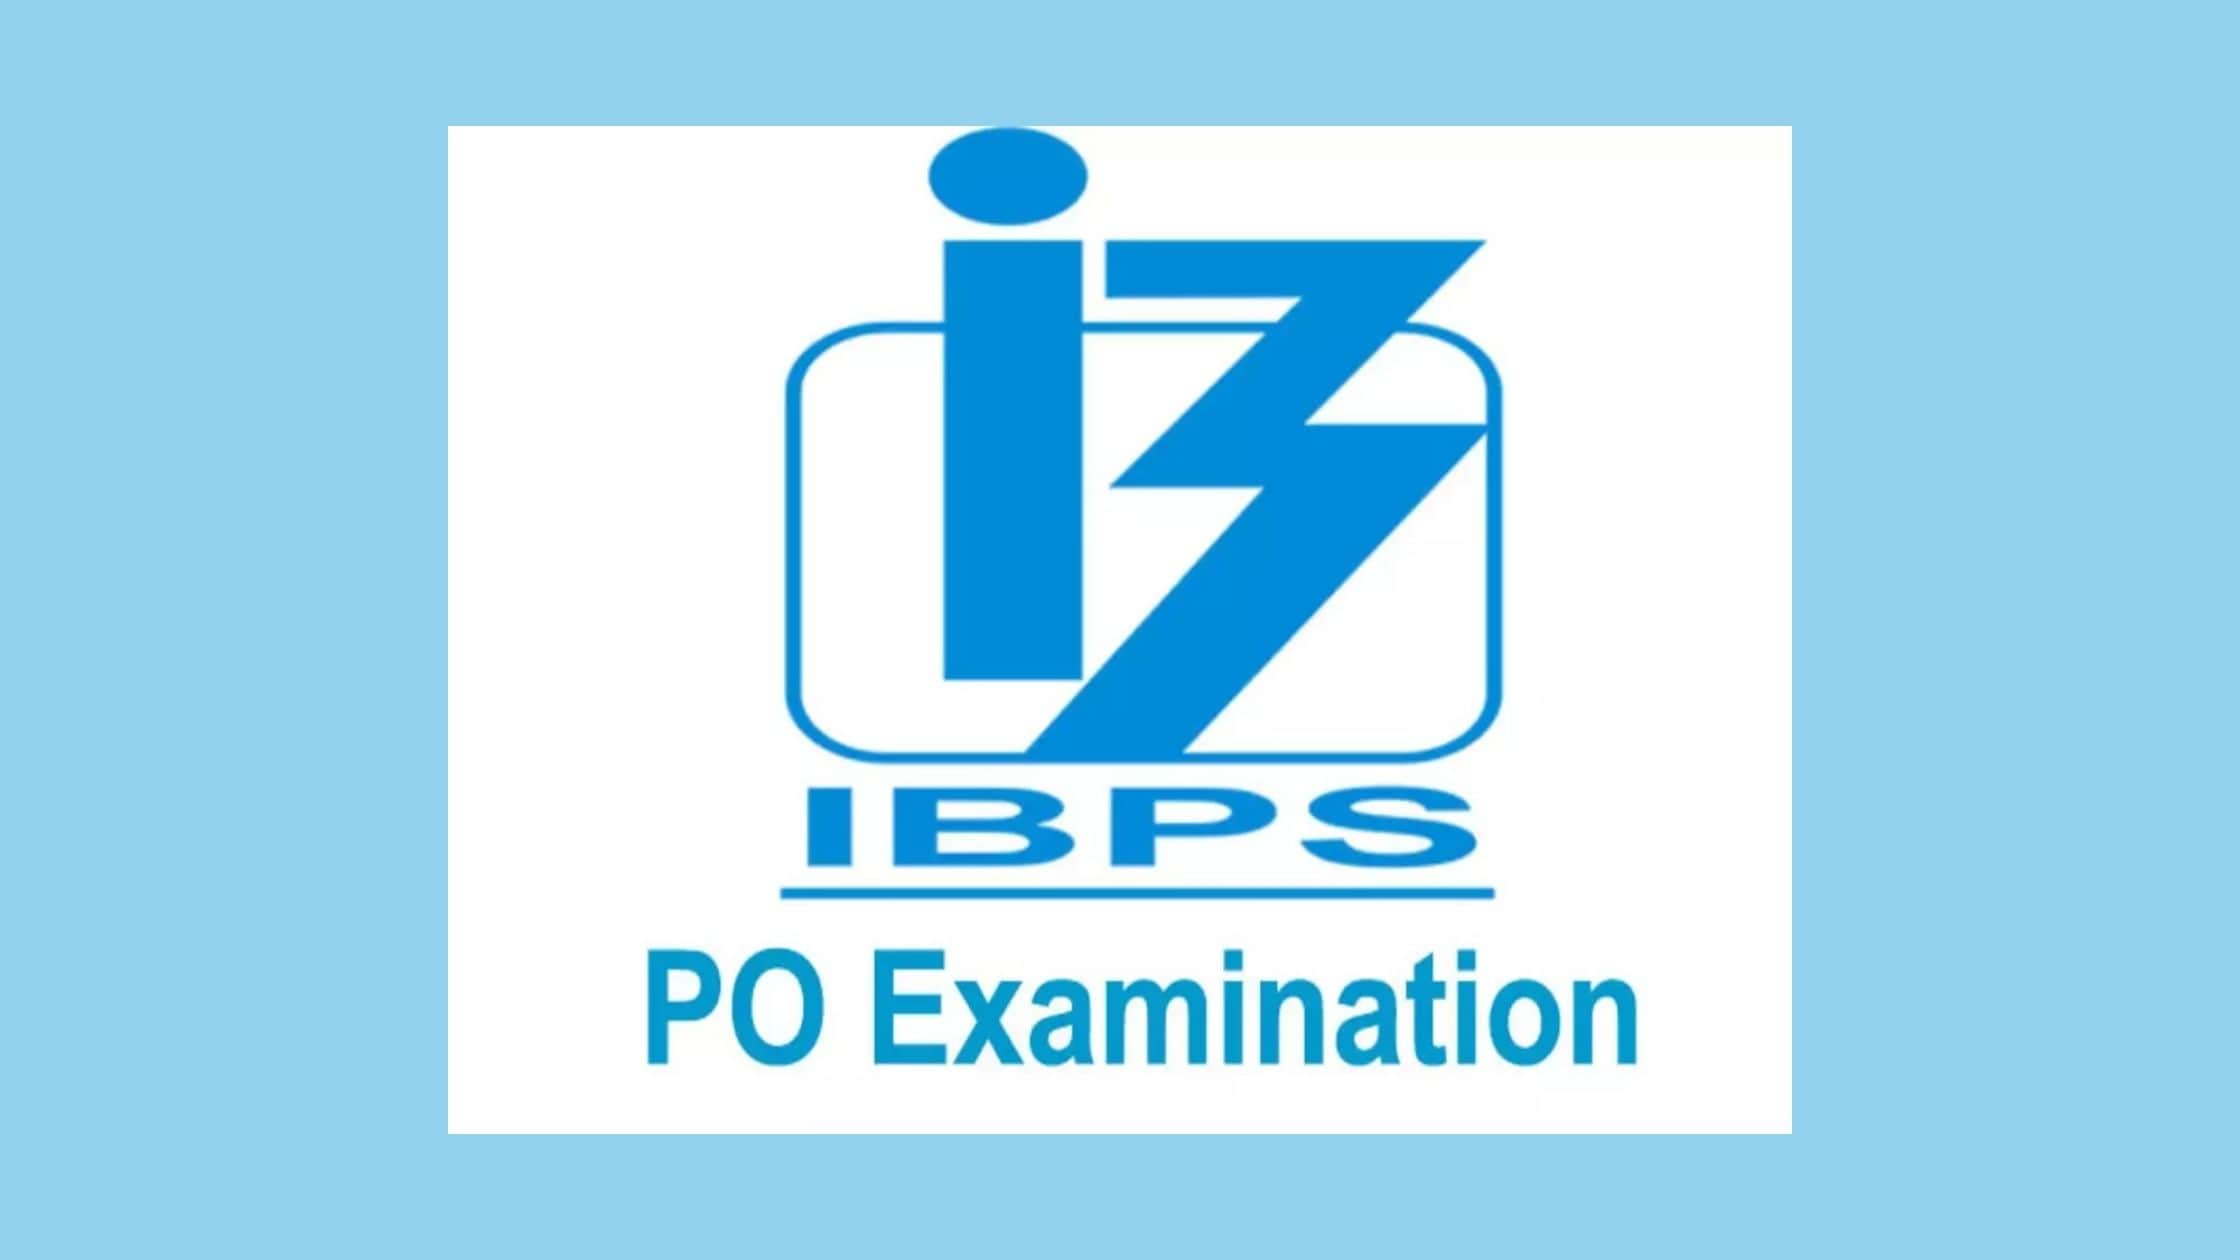 IBPS PO Exams and the Relevant Information